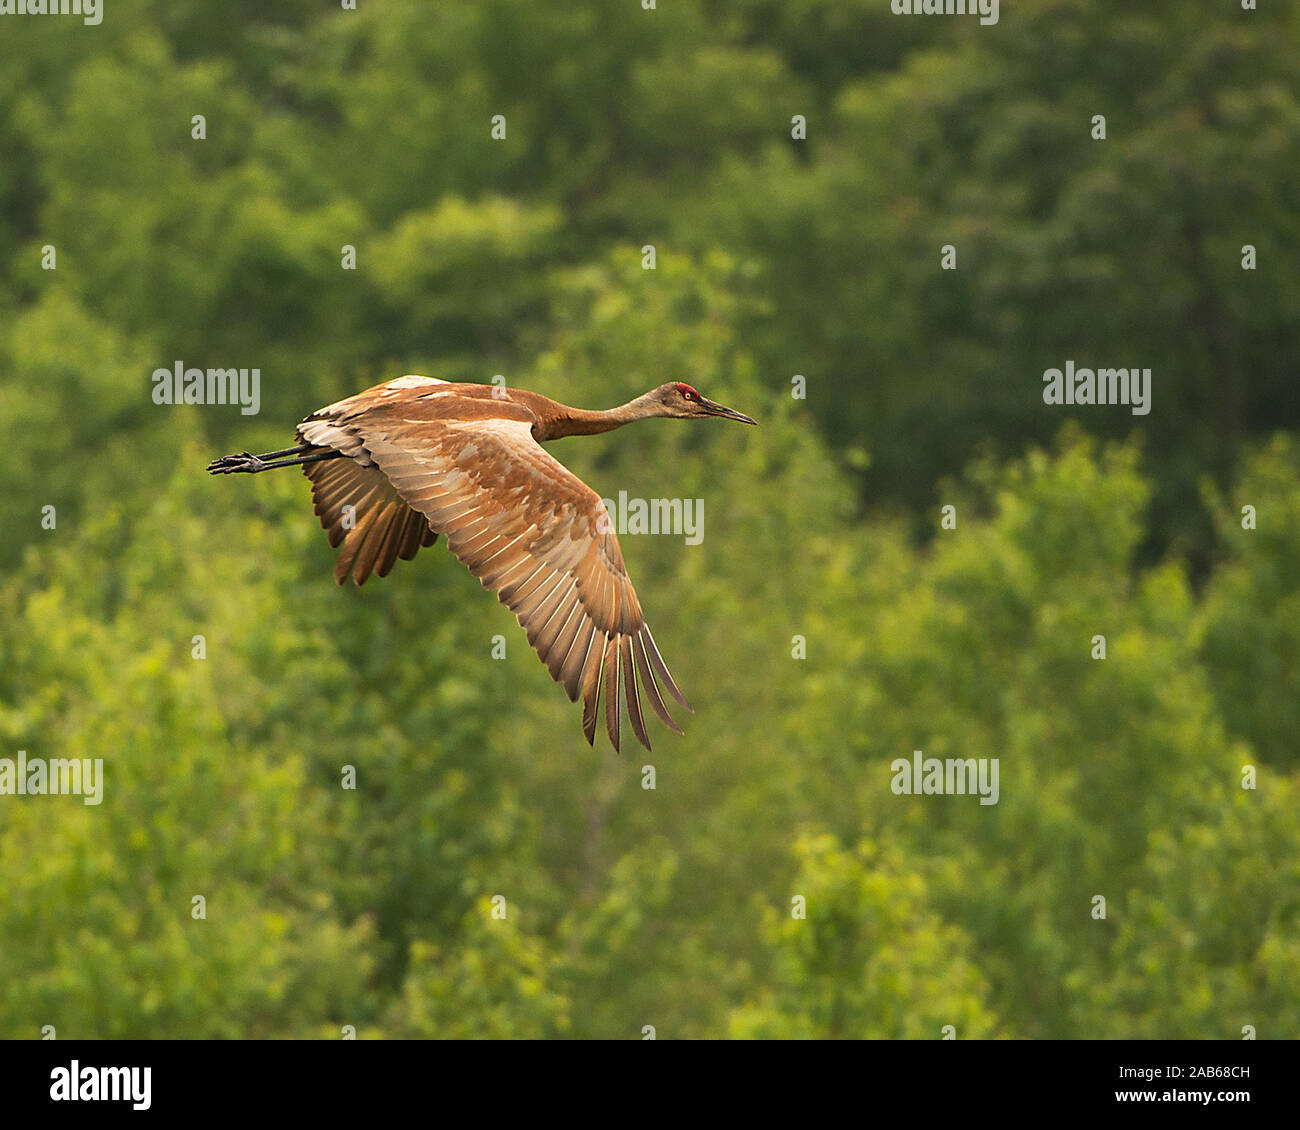 Sandhill Crane flying over trees with a bokeh background in its surrounding and environment. Stock Photo